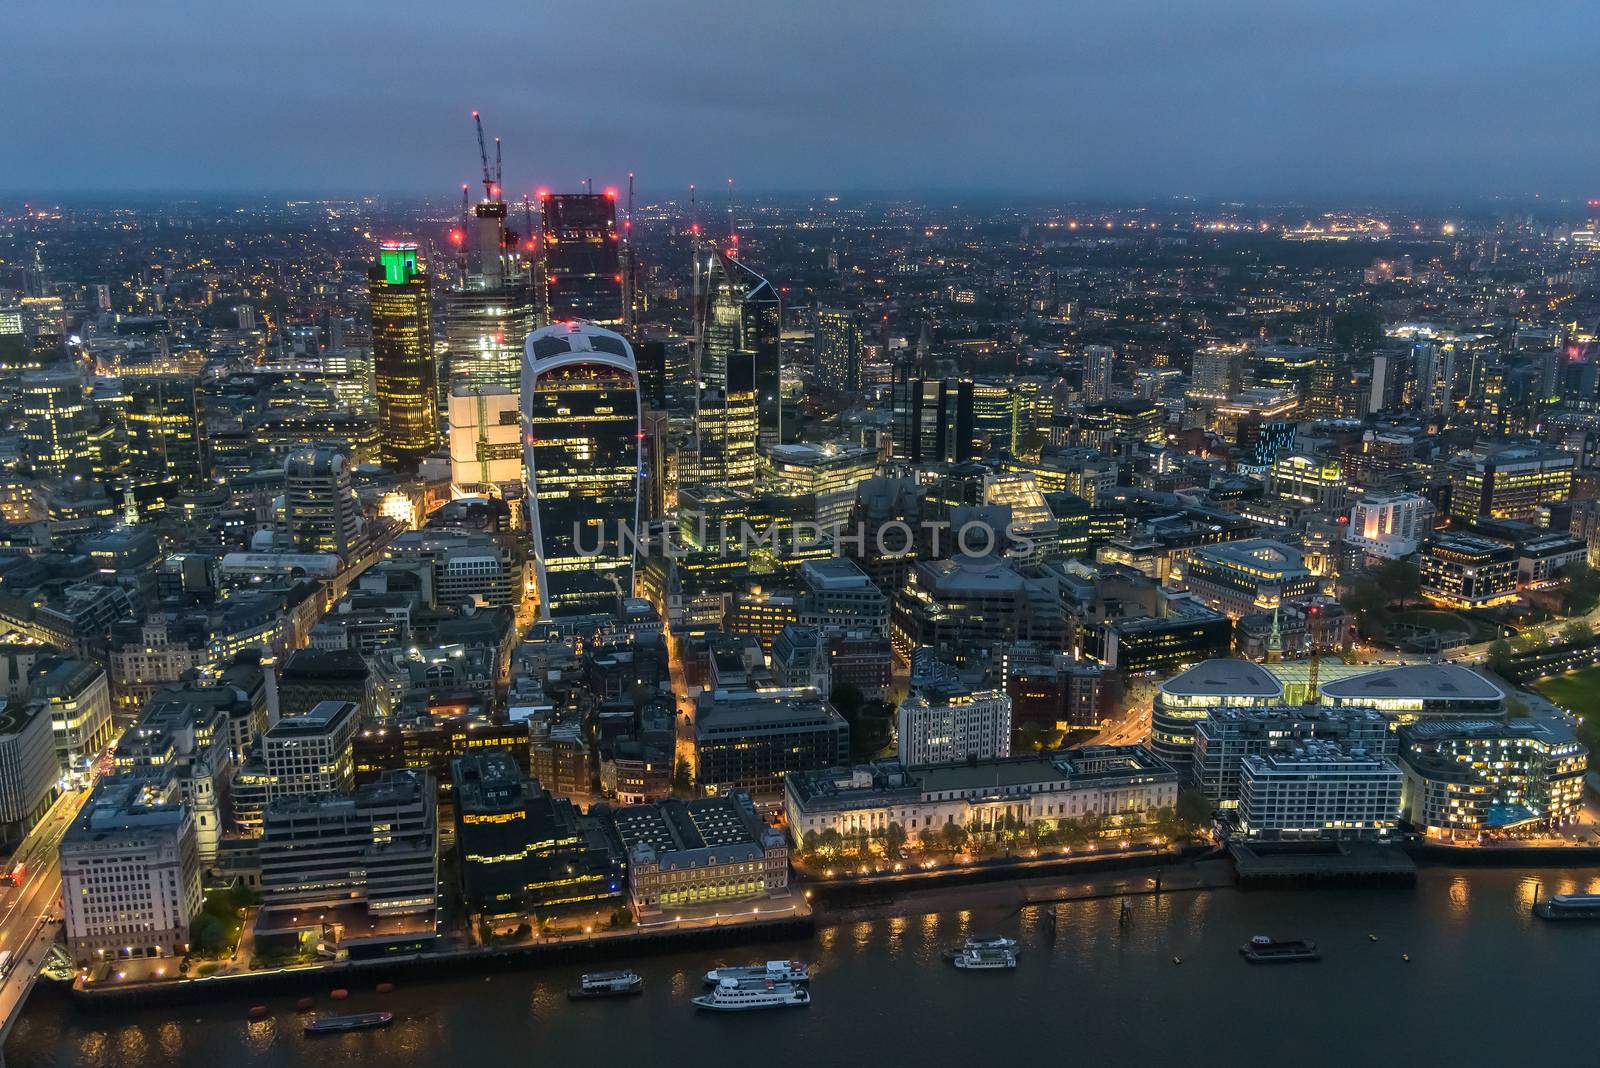 Aerial view of City of London at night on a cloudy day